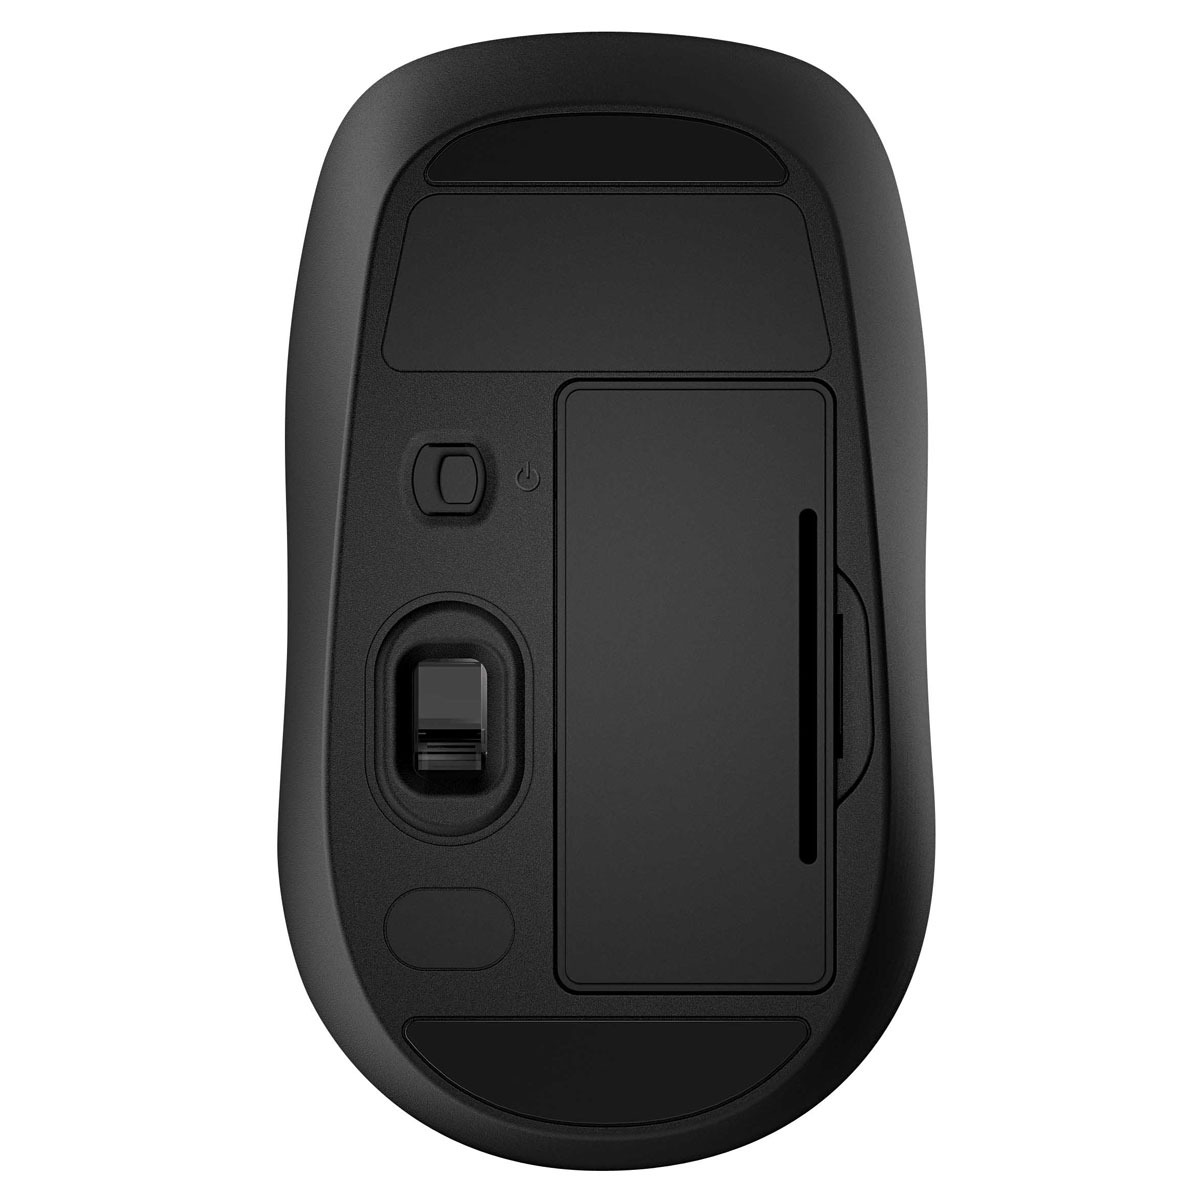 Microsoft wireless mouse 1000 not pairing